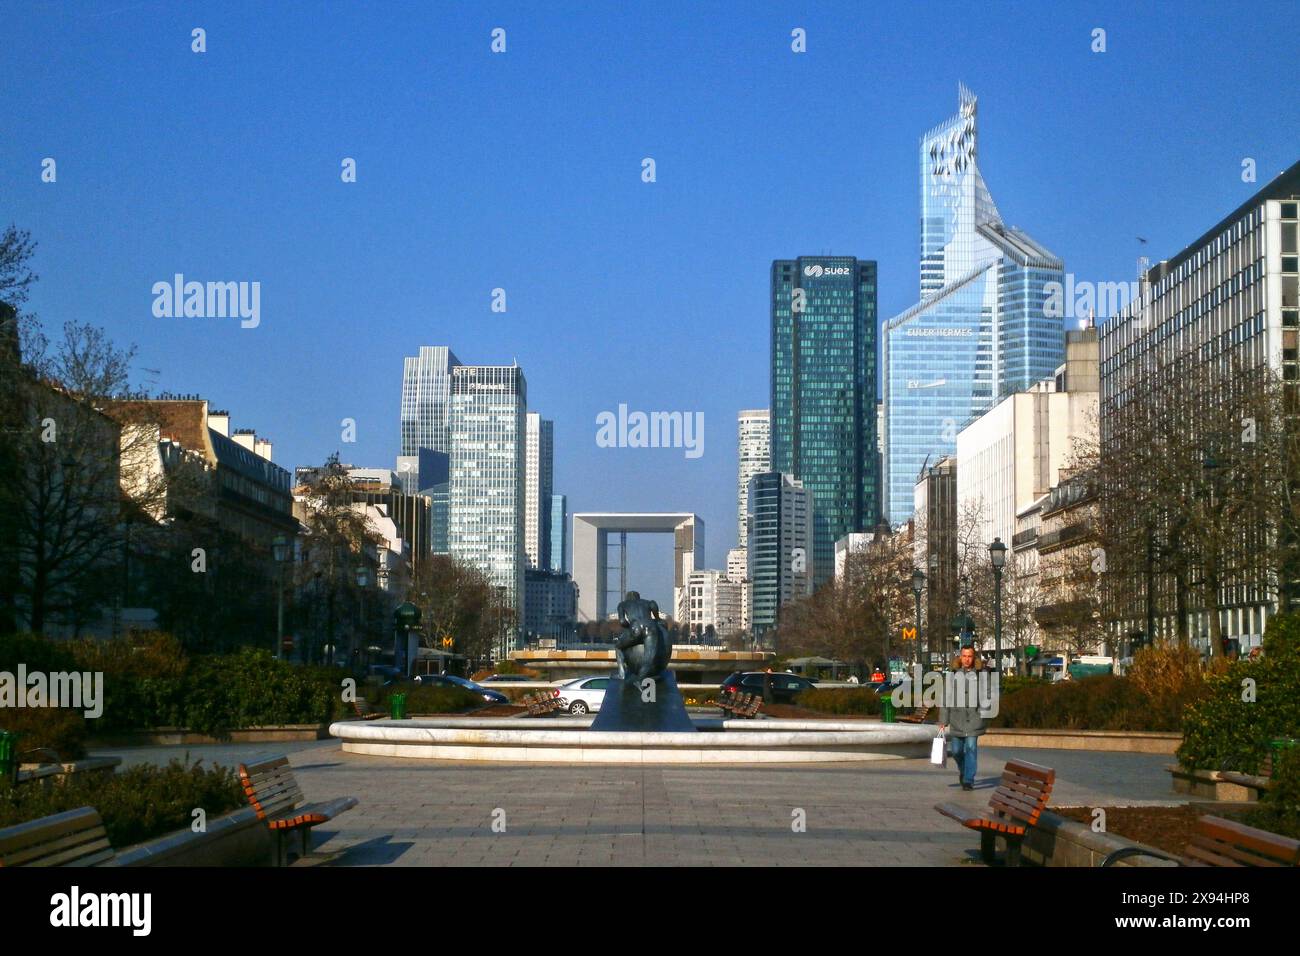 Neuilly-sur-Seine, France - February 23 2018: La Défense viewed from the Square Saint-Jean in Neuilly-sur-Seine. Stock Photo